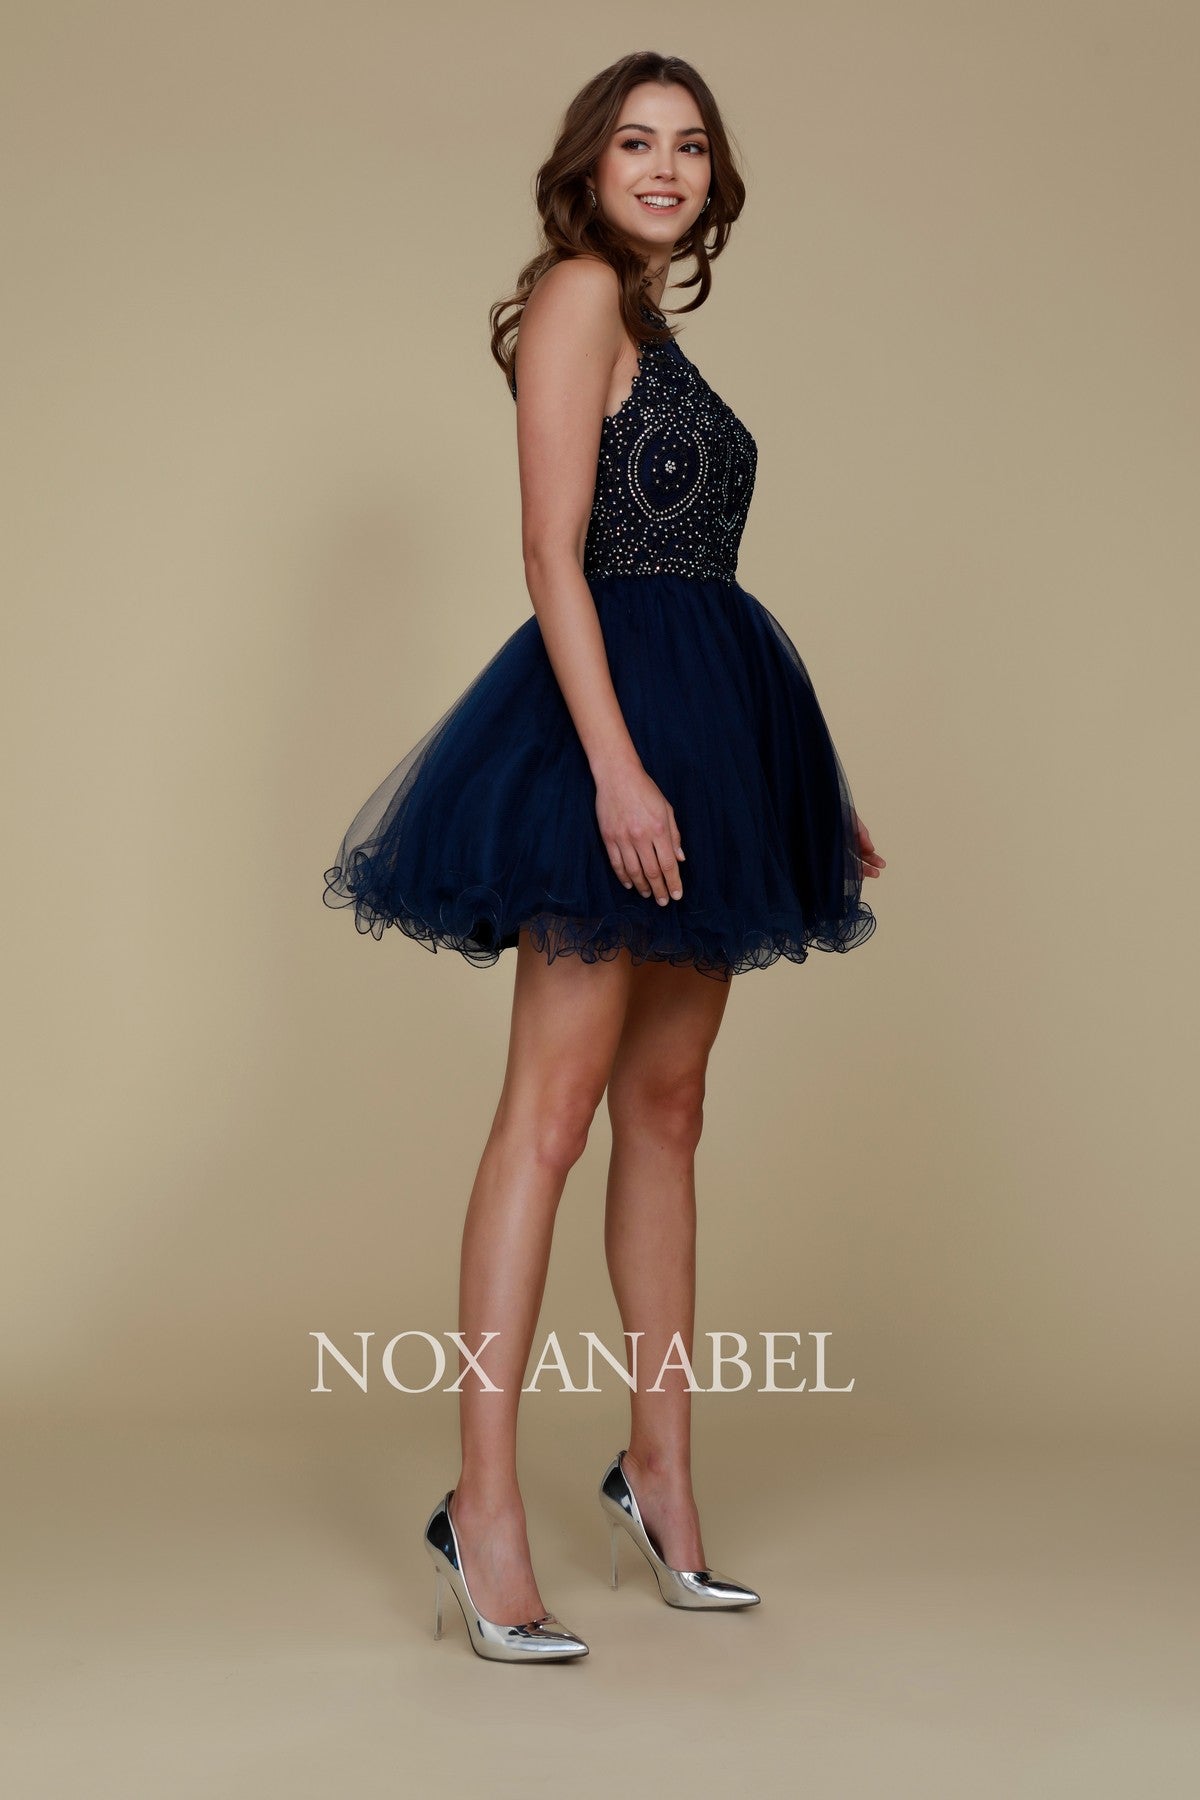 Clearance Sale - Fully Lined Sparkly Lace Tulle Cocktail Dress By Nox Anabel -B652